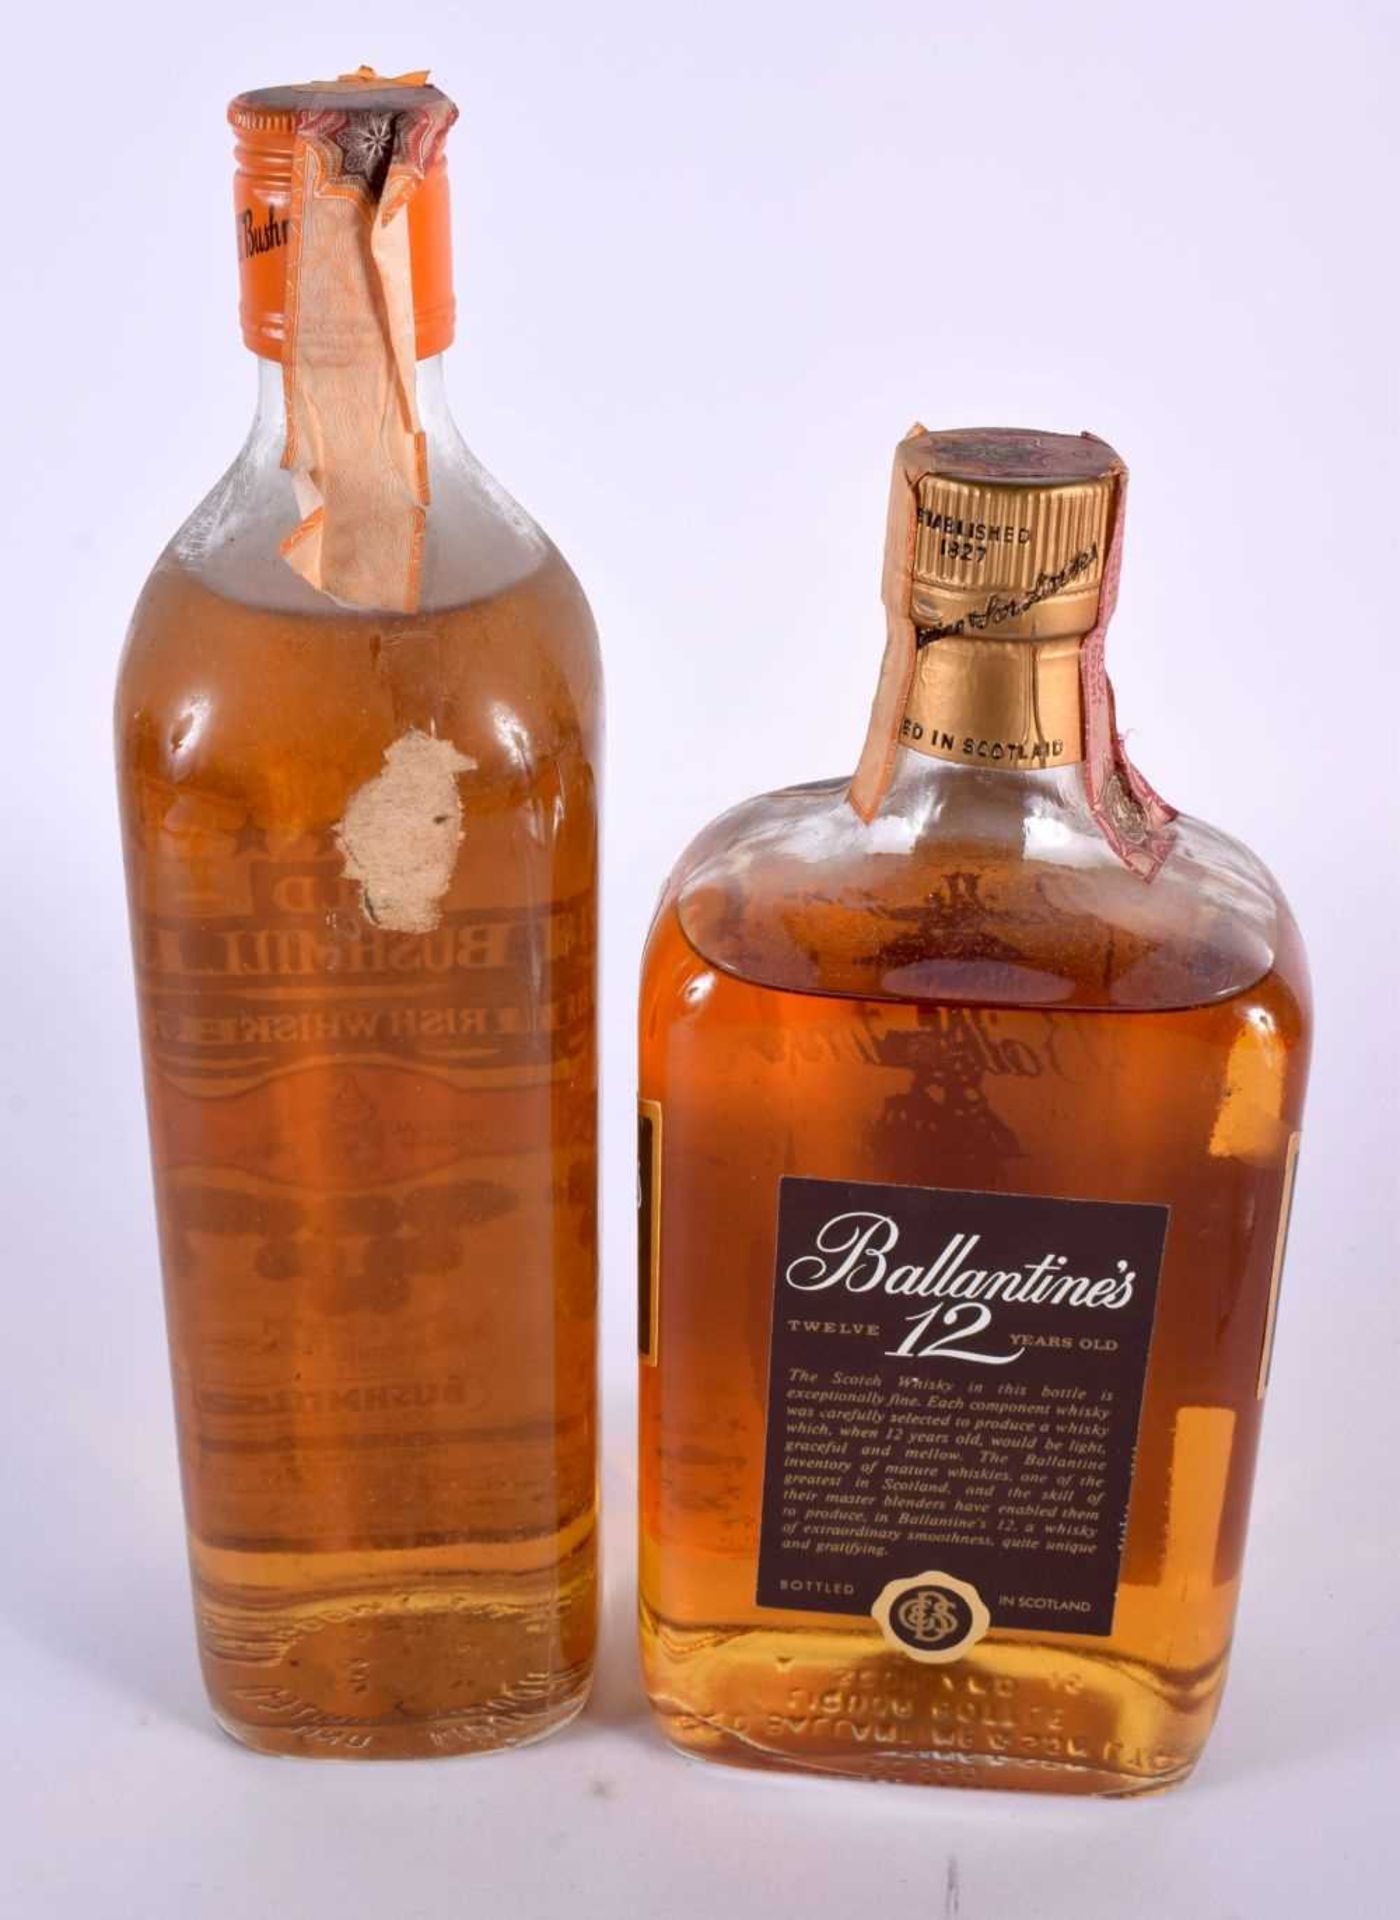 OLD BUSHMILLS IRISH WHISKY together with Ballantines 12 year old Scotch whisky. (2) - Image 2 of 2